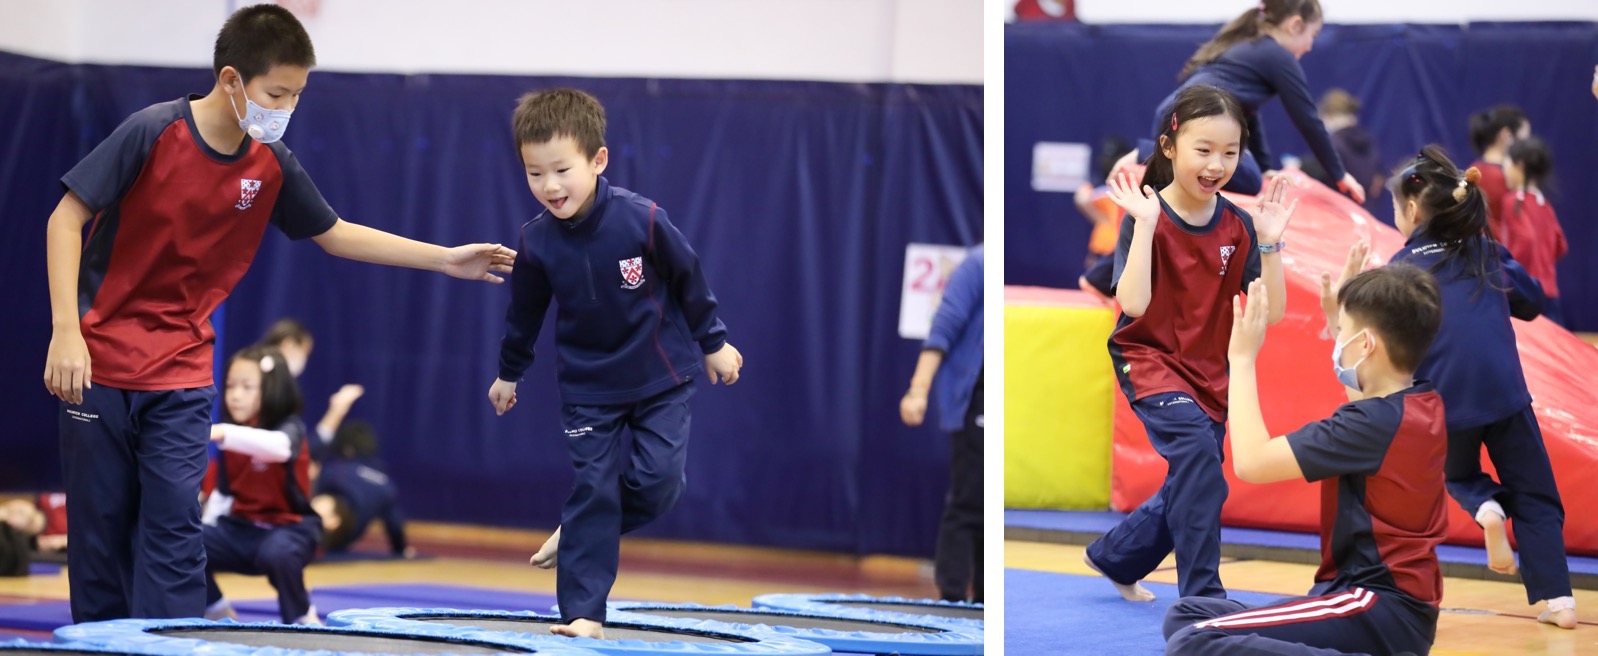 Early Years and Junior School students - Teddy Bear Gym 2020